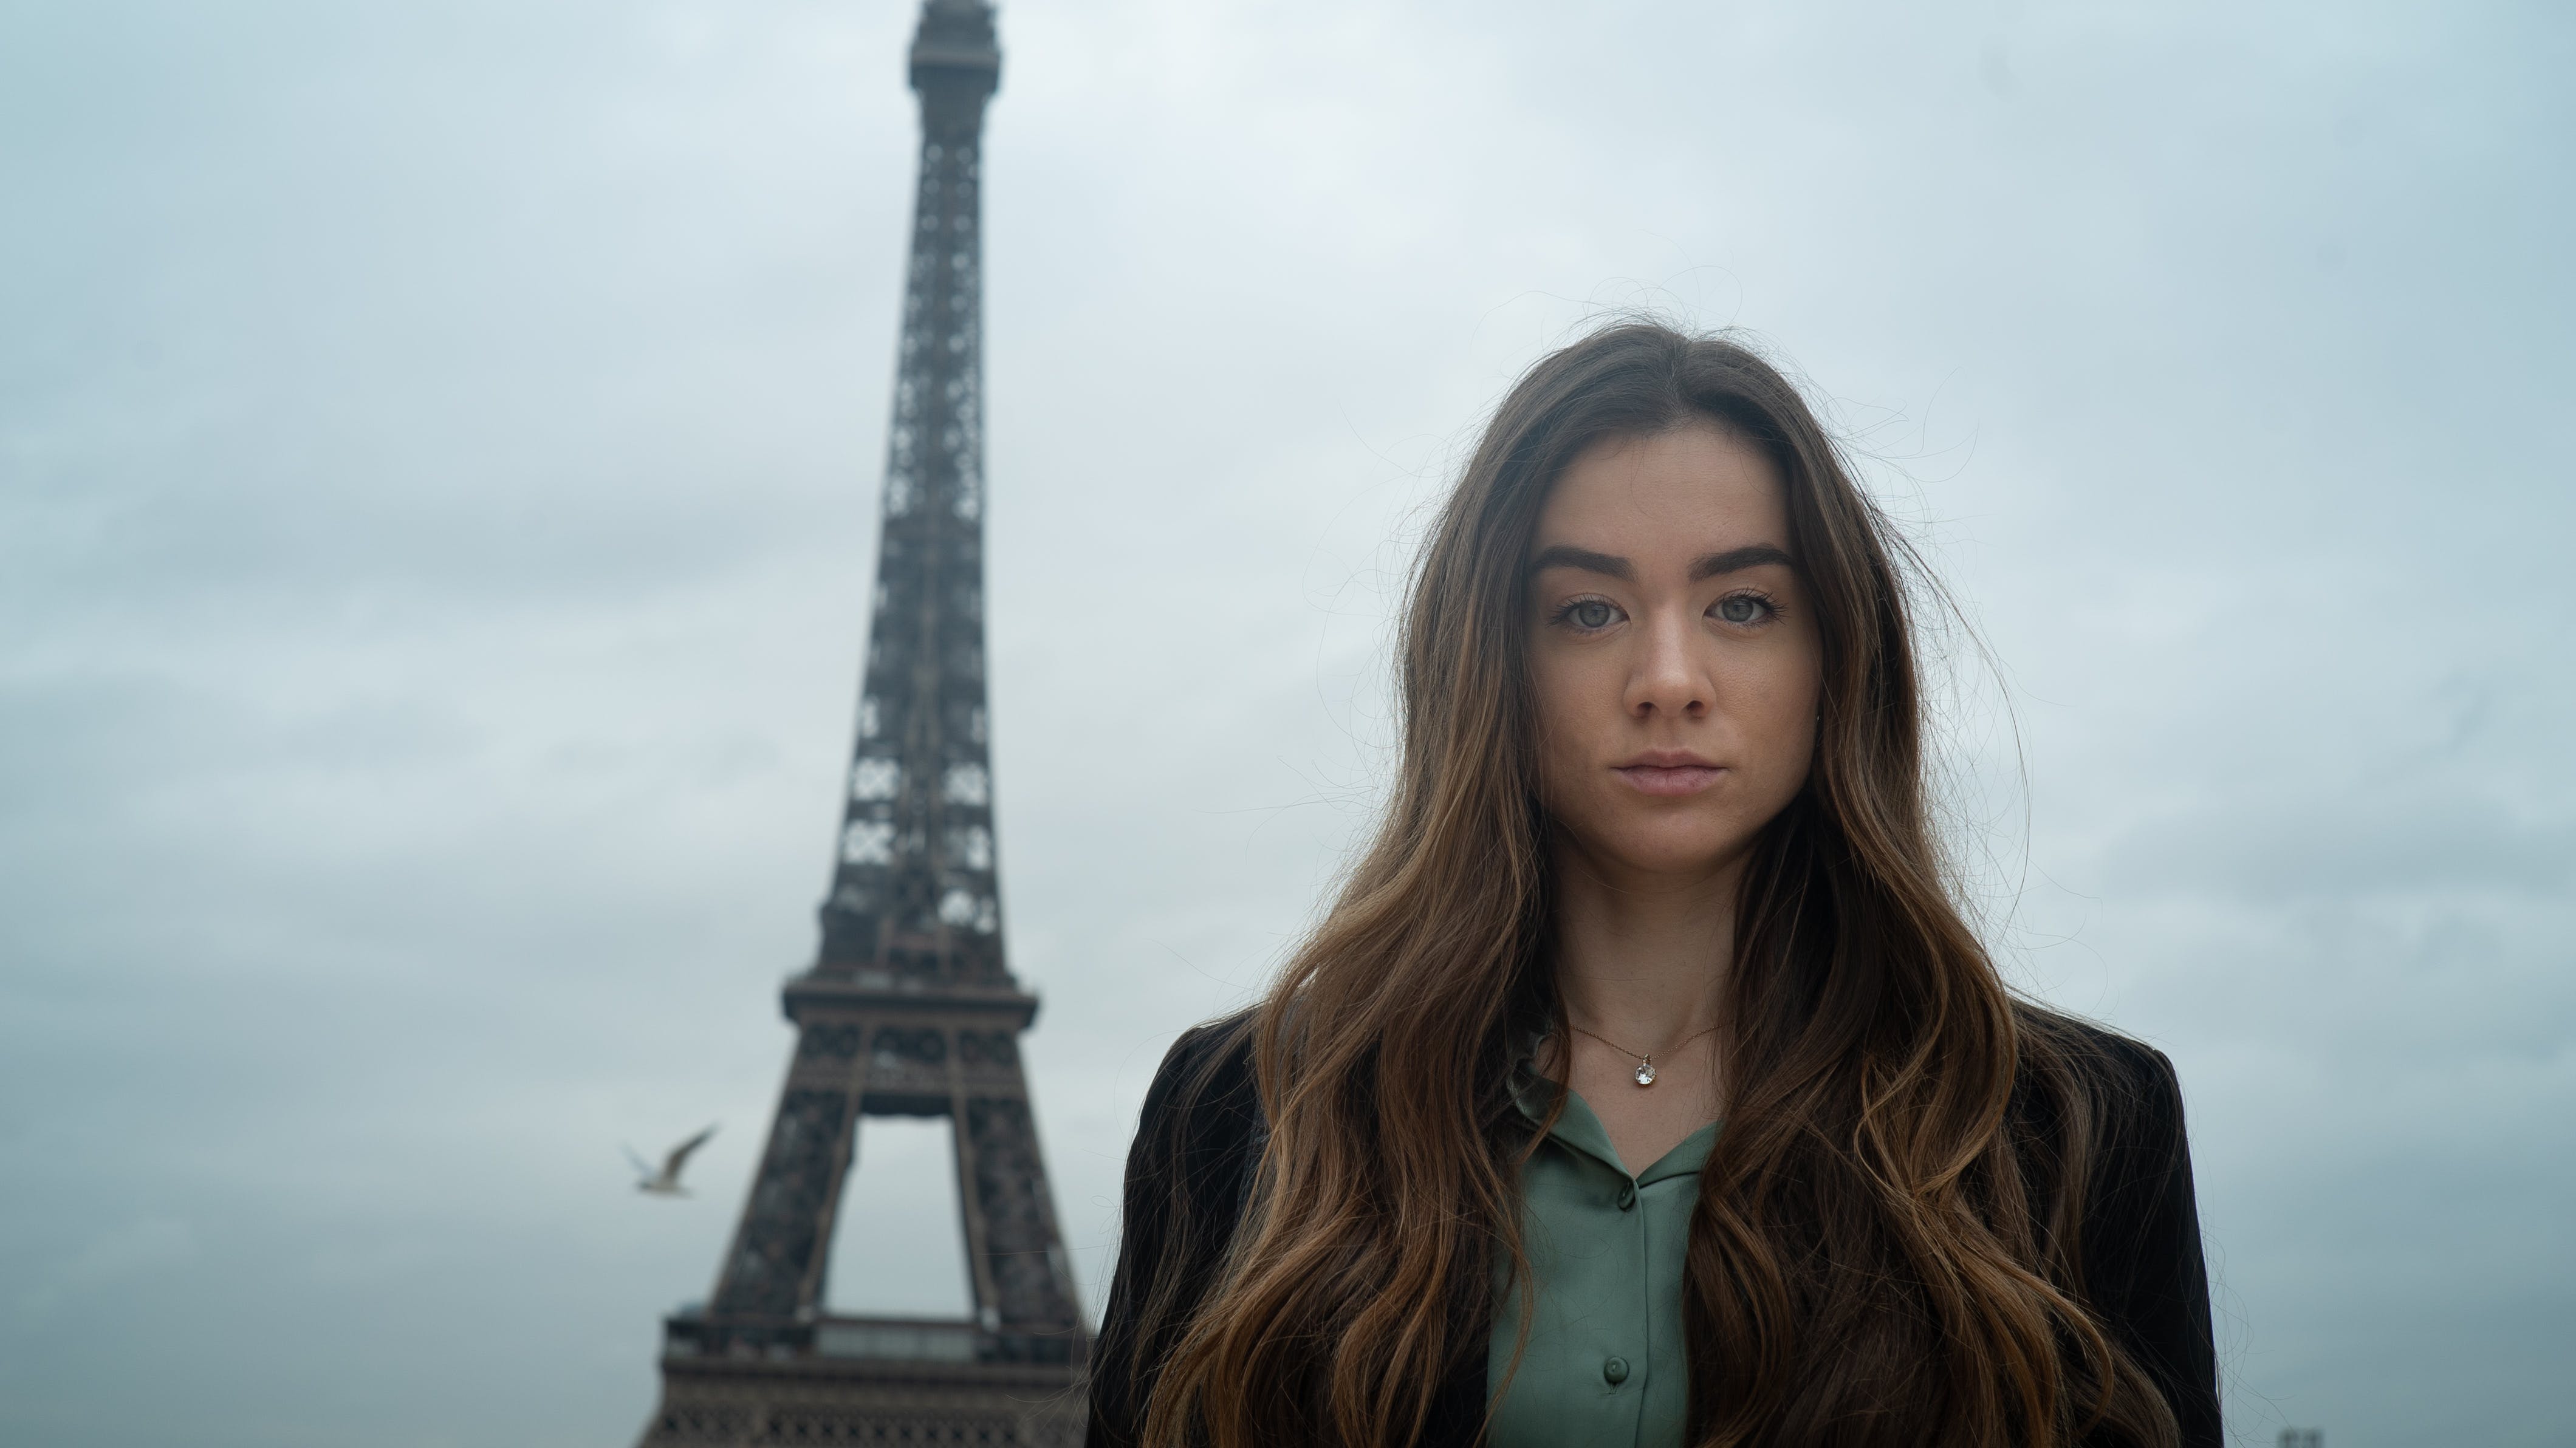 Is Paris Safe for Solo Female Travellers